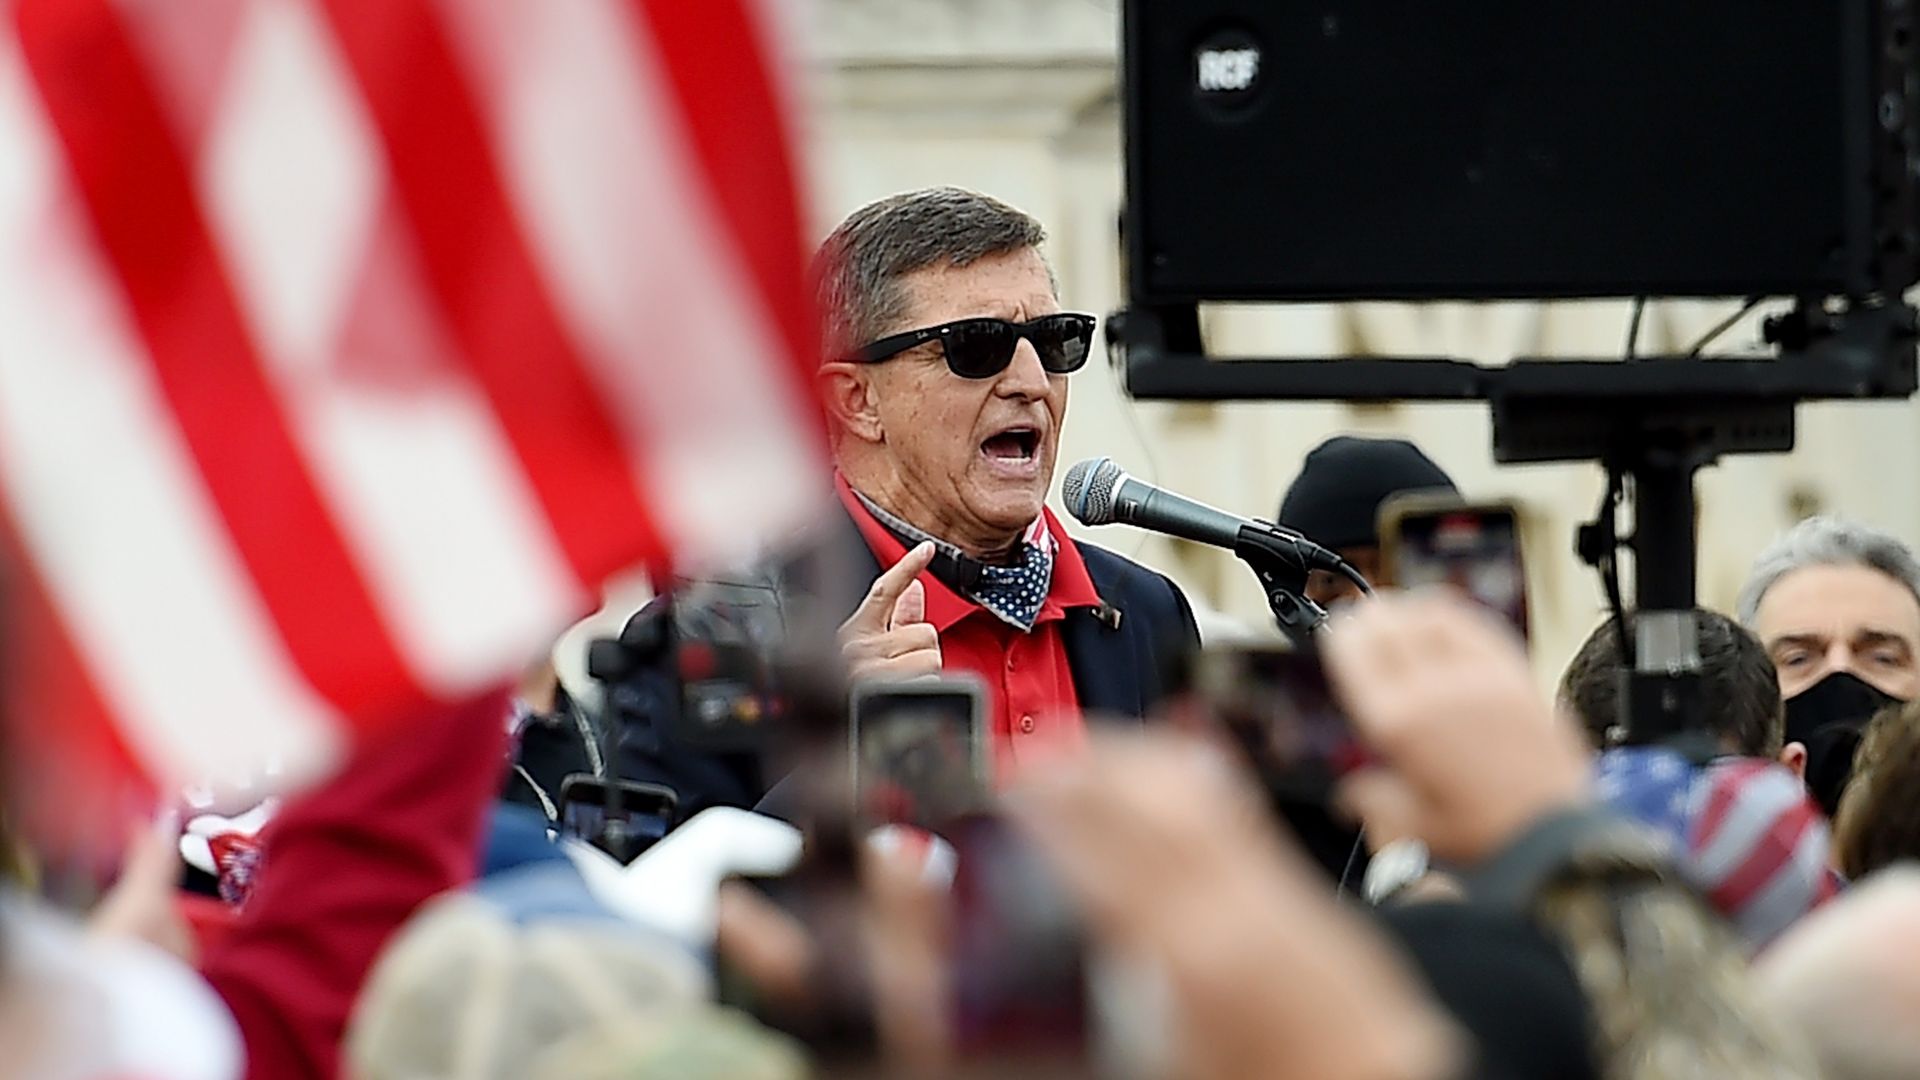 Former National Security Adviser Mike Flynn speaking at the Million MAGA March in Washington, D.C., on Dec. 12.